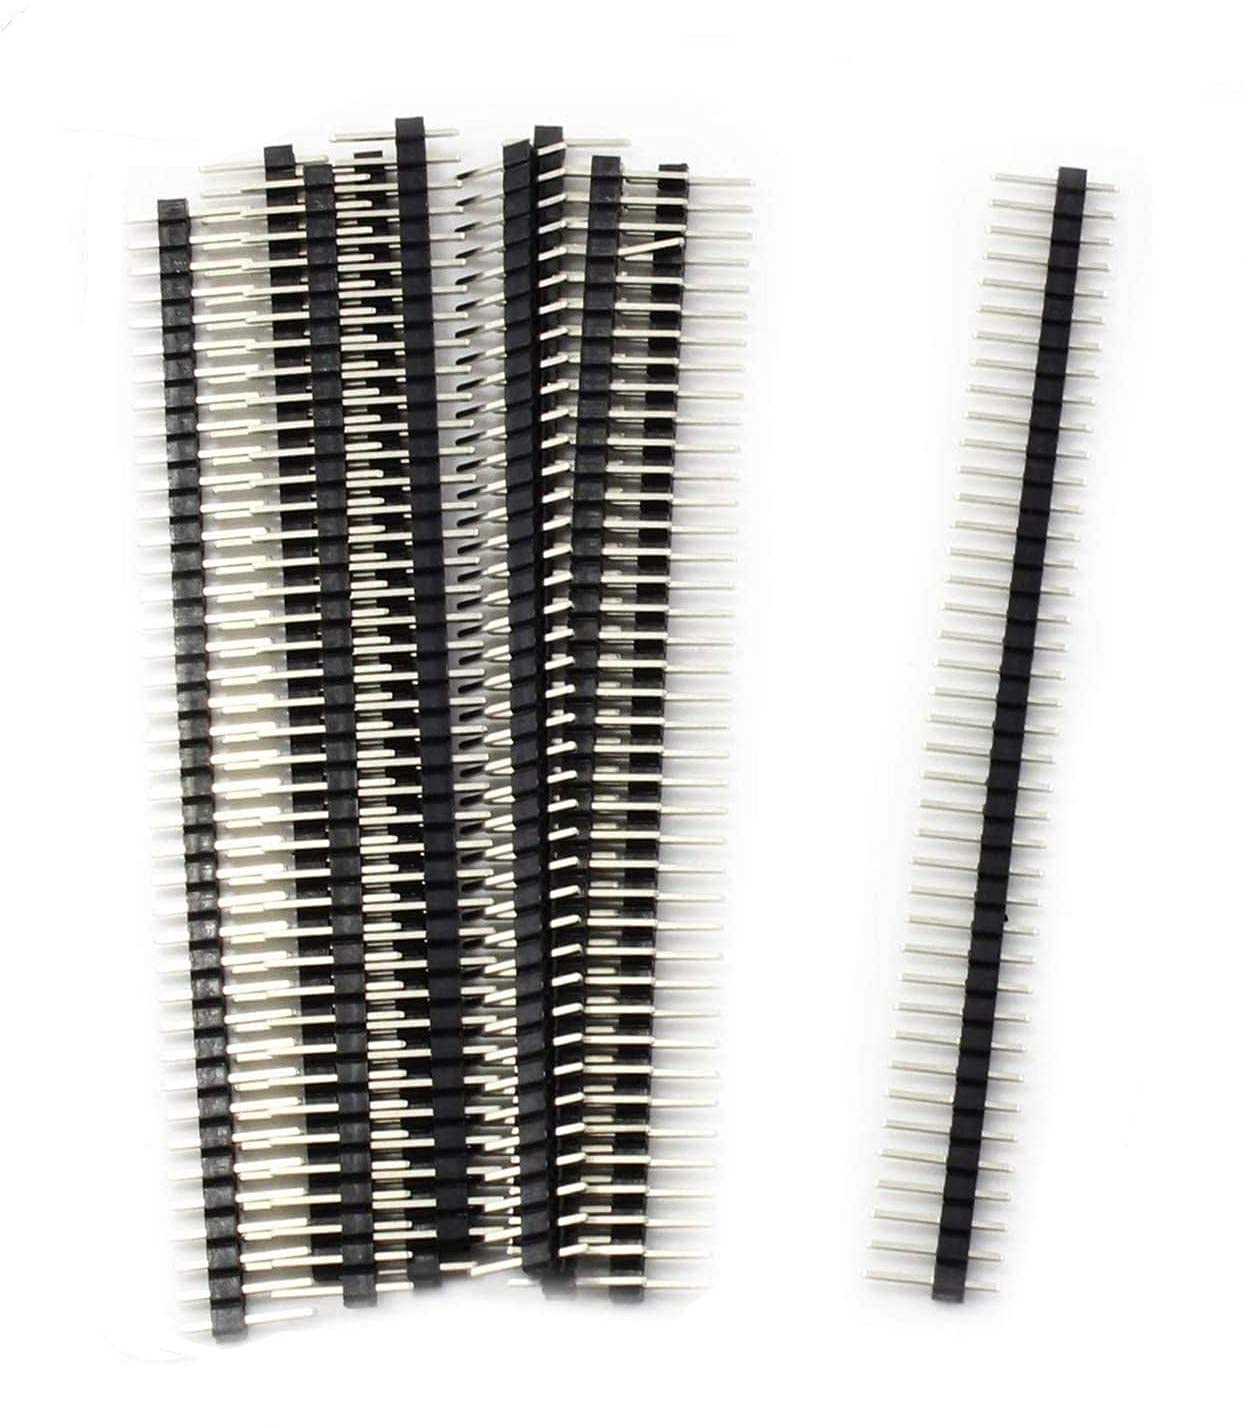 Male Berg Strip Breakable Header Pin 1x40 (10 Pieces)